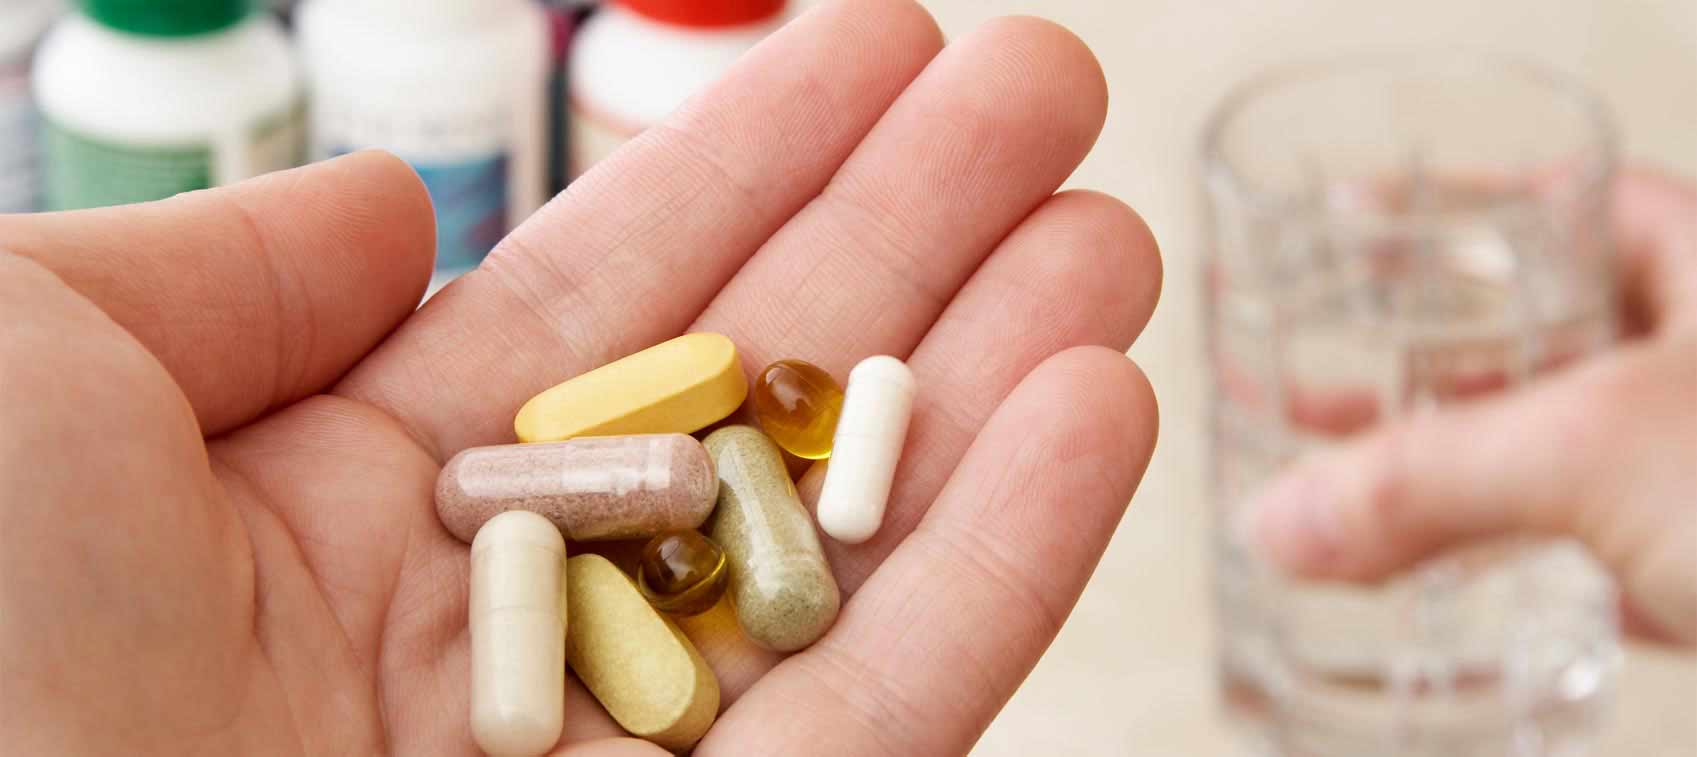 Benefits Of Taking Multivitamins Daily